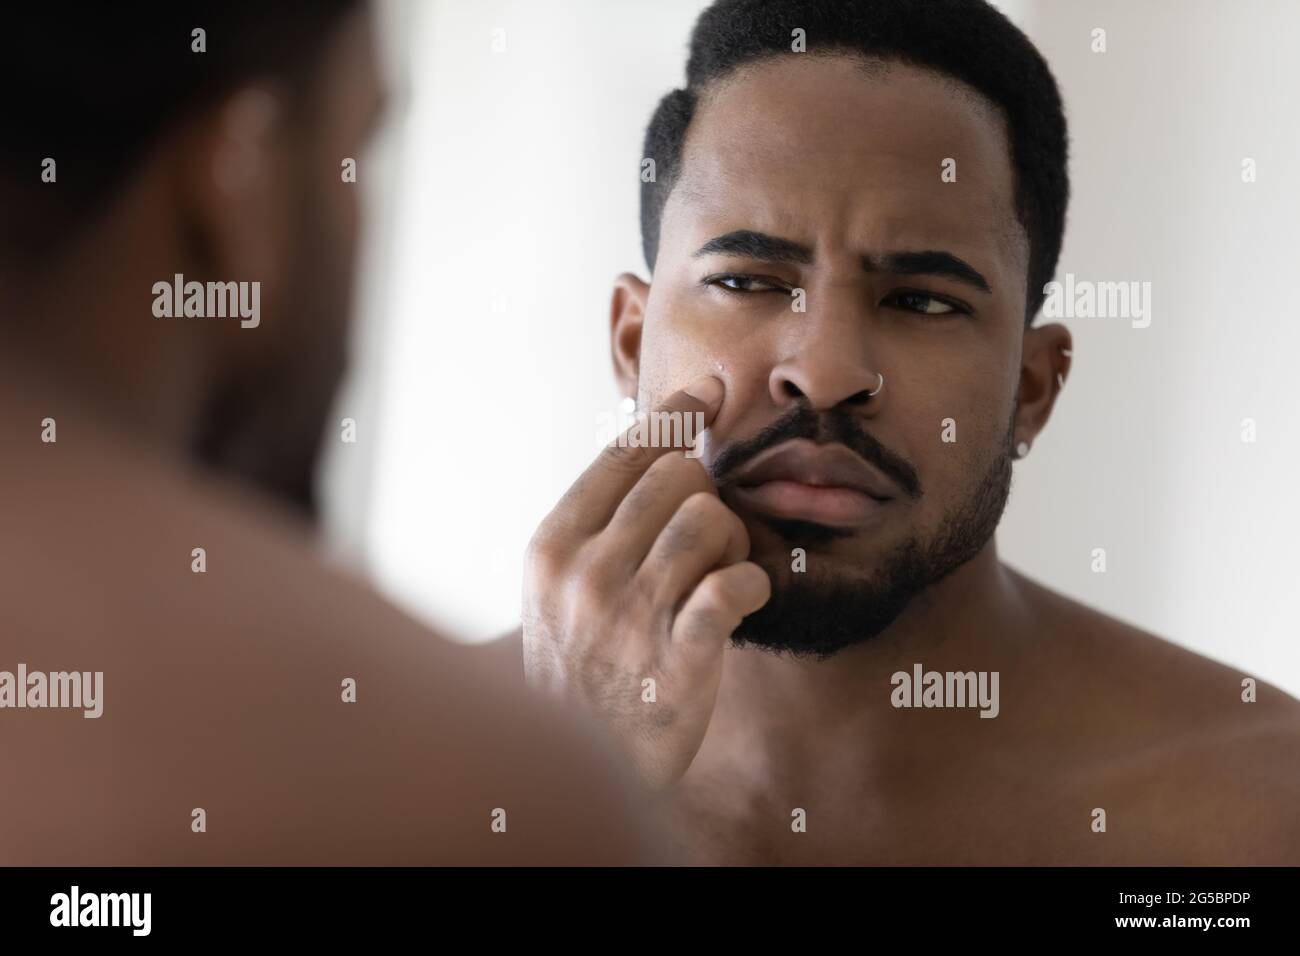 Concerned metrosexual young Black guy with stylish beard Stock Photo